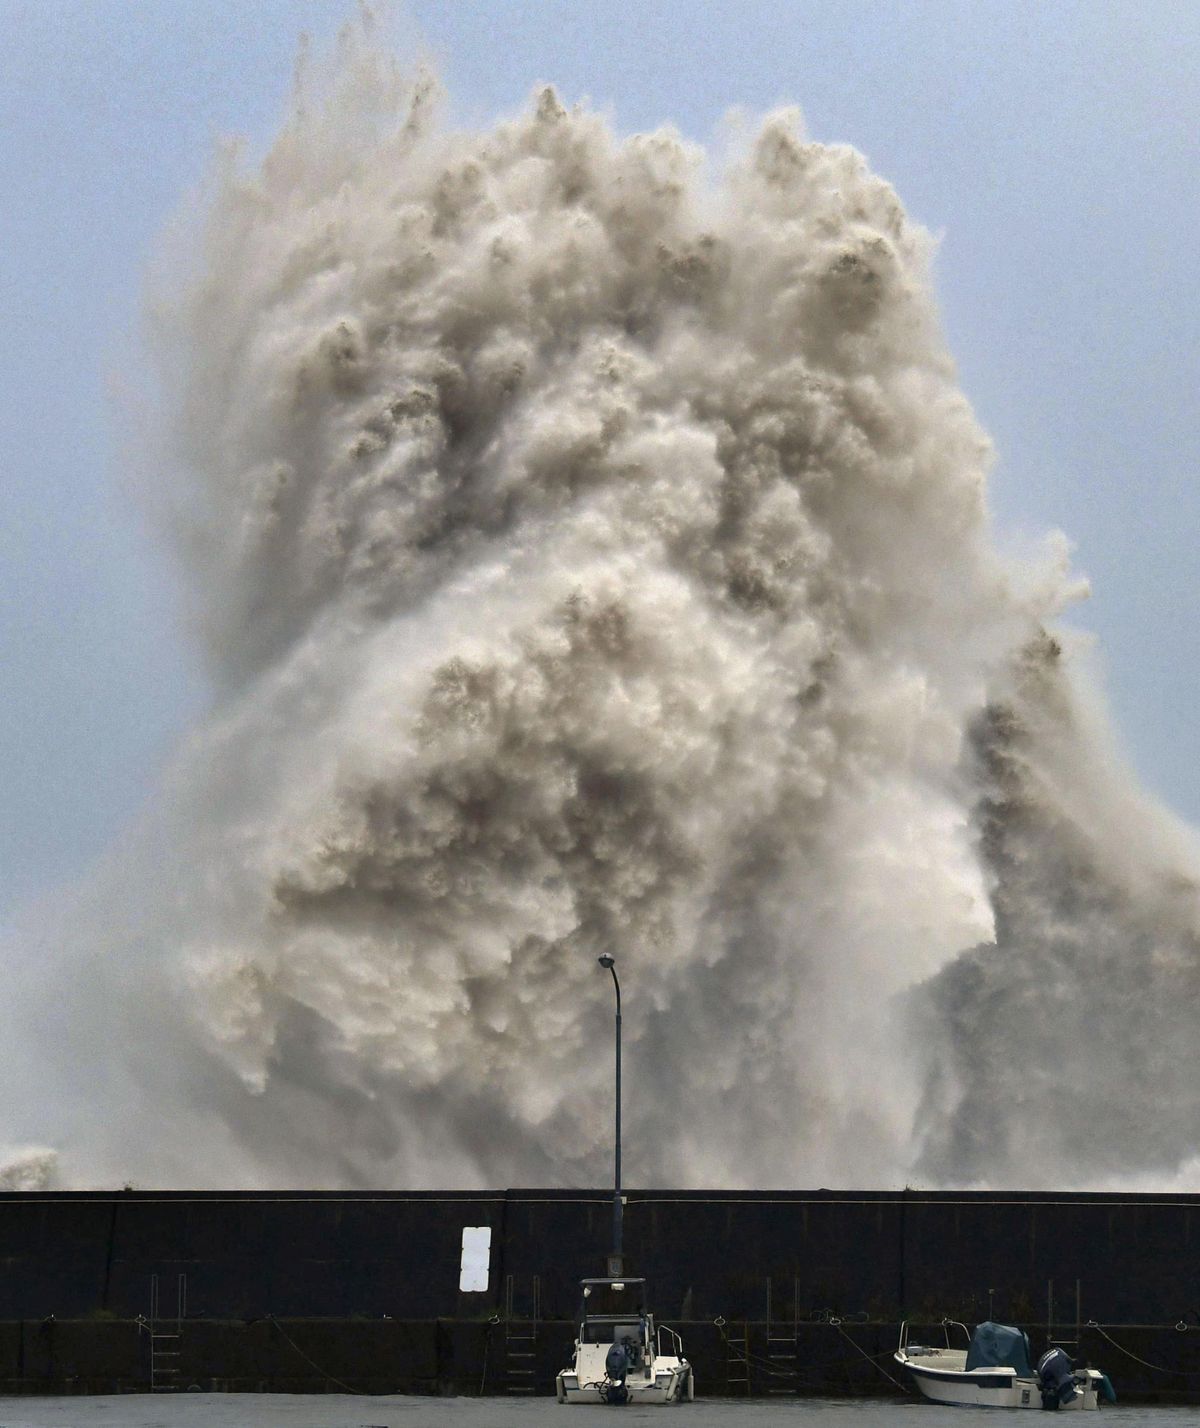 High waves hit a fishing port in Aki, Kochi prefecture, western Japan, on Thursday, Aug. 23, 2018. A typhoon is expected to cross western Japan on Thursday night. Japan’s weather agency has warned of strong gusts, high waves and heavy rain. (Chika Oshima / AP)